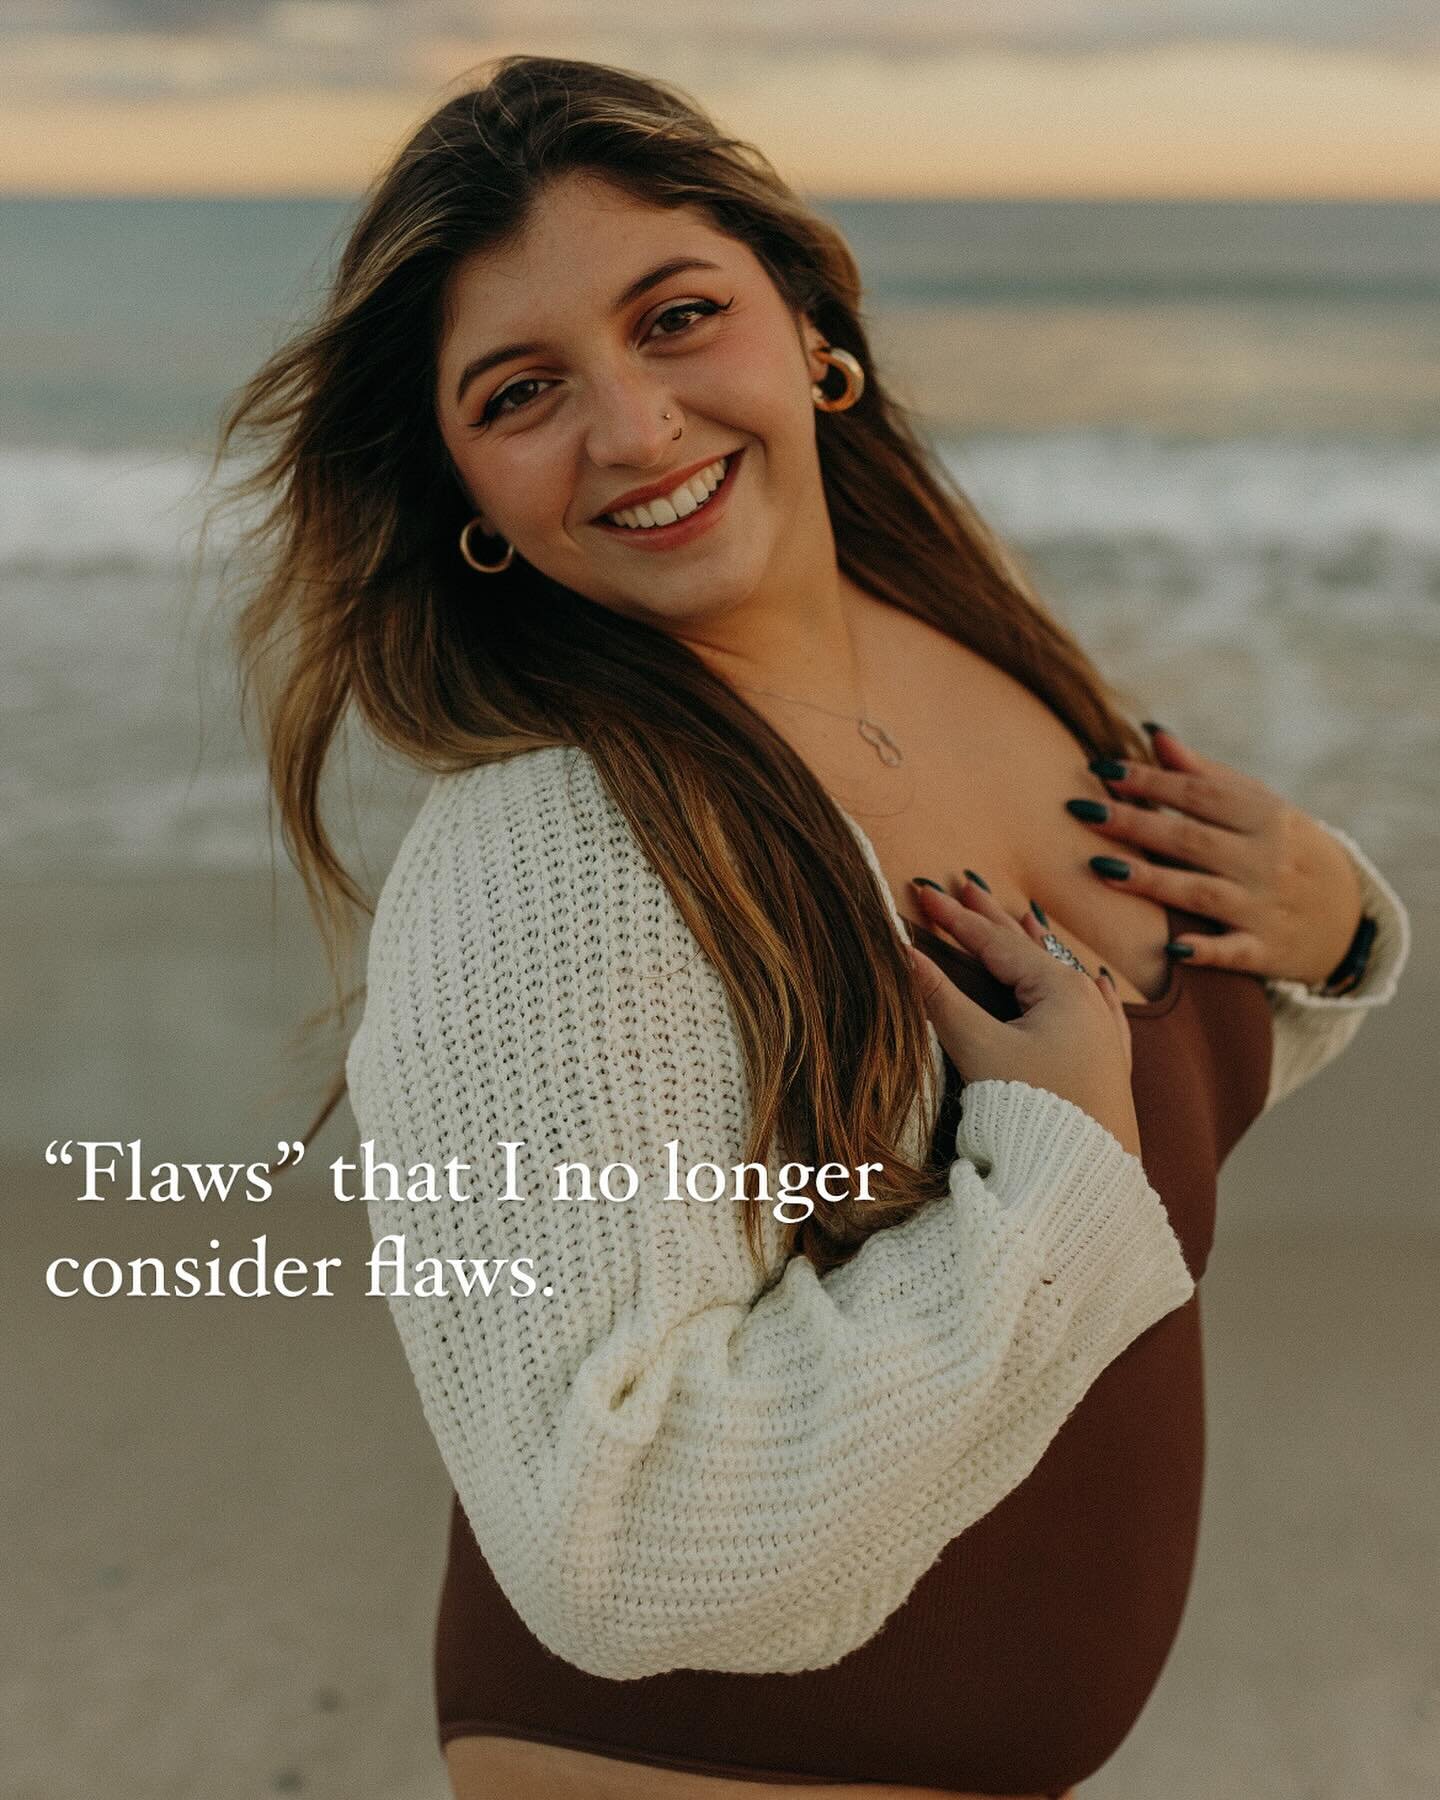 There&rsquo;s beauty in knowing that your &ldquo;flaws&rdquo; aren&rsquo;t really flaws. 

I LOVE this picture. You can see my joy, my happiness, my confidence. 

But there was a teeny tiiinnnyyyy part that recognized these &ldquo;flaws&rdquo; and pr